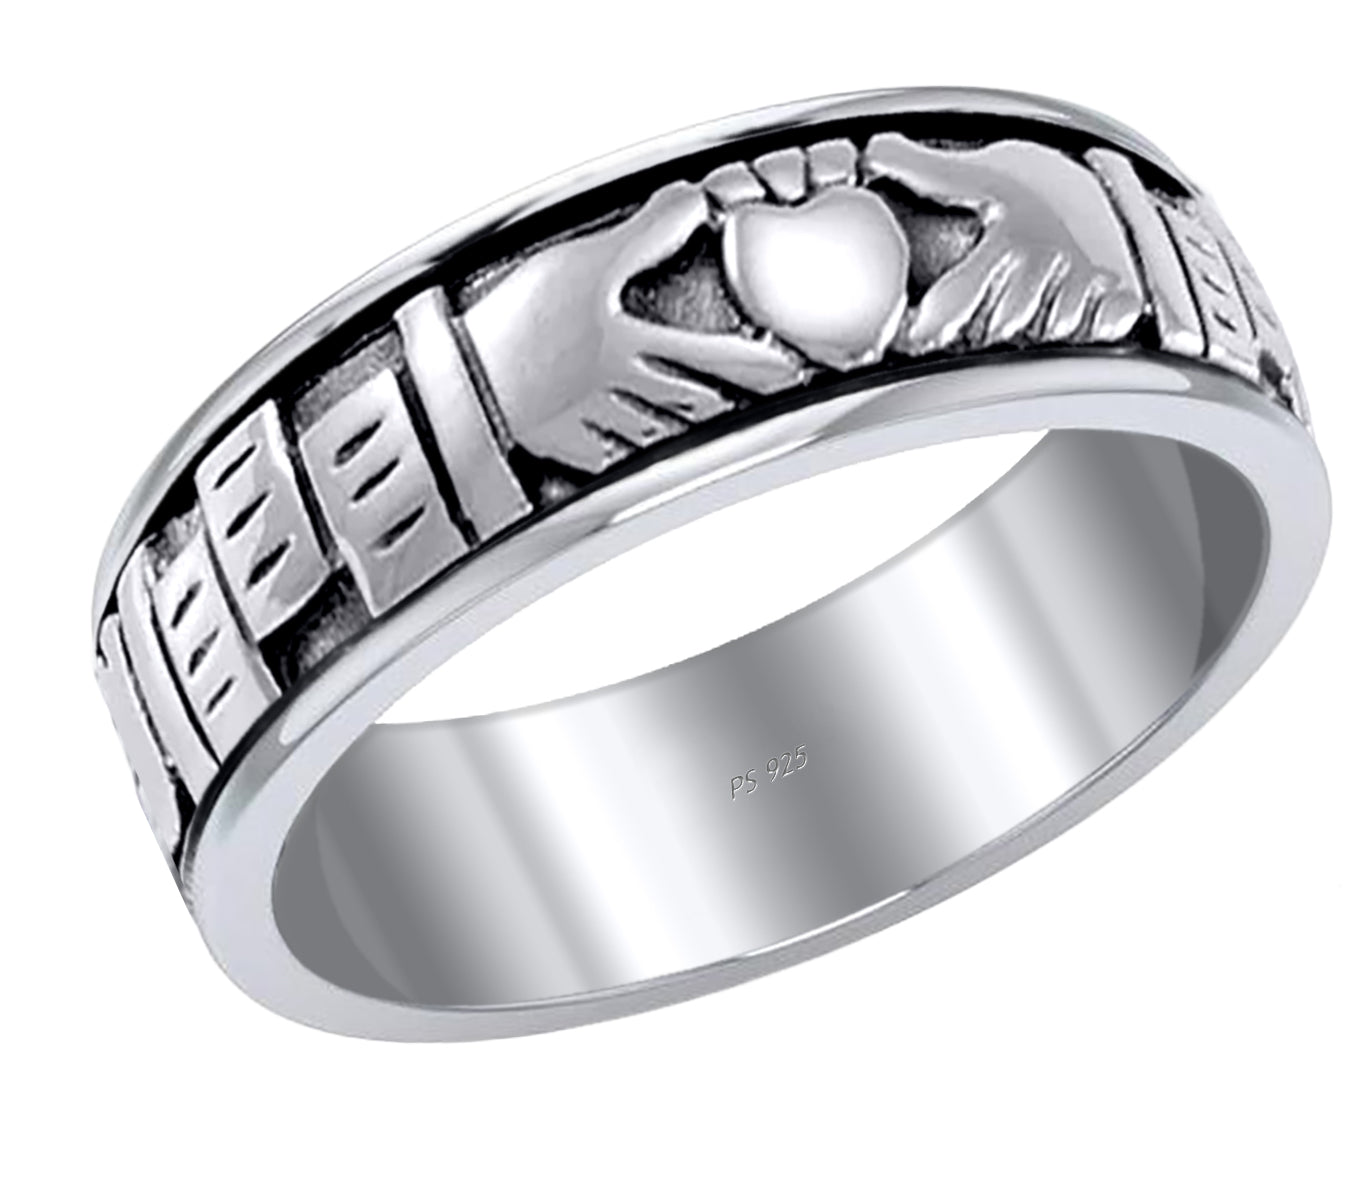 Ladies 925 Sterling Silver Irish Celtic Claddagh Spinner Ring Band - US Jewels